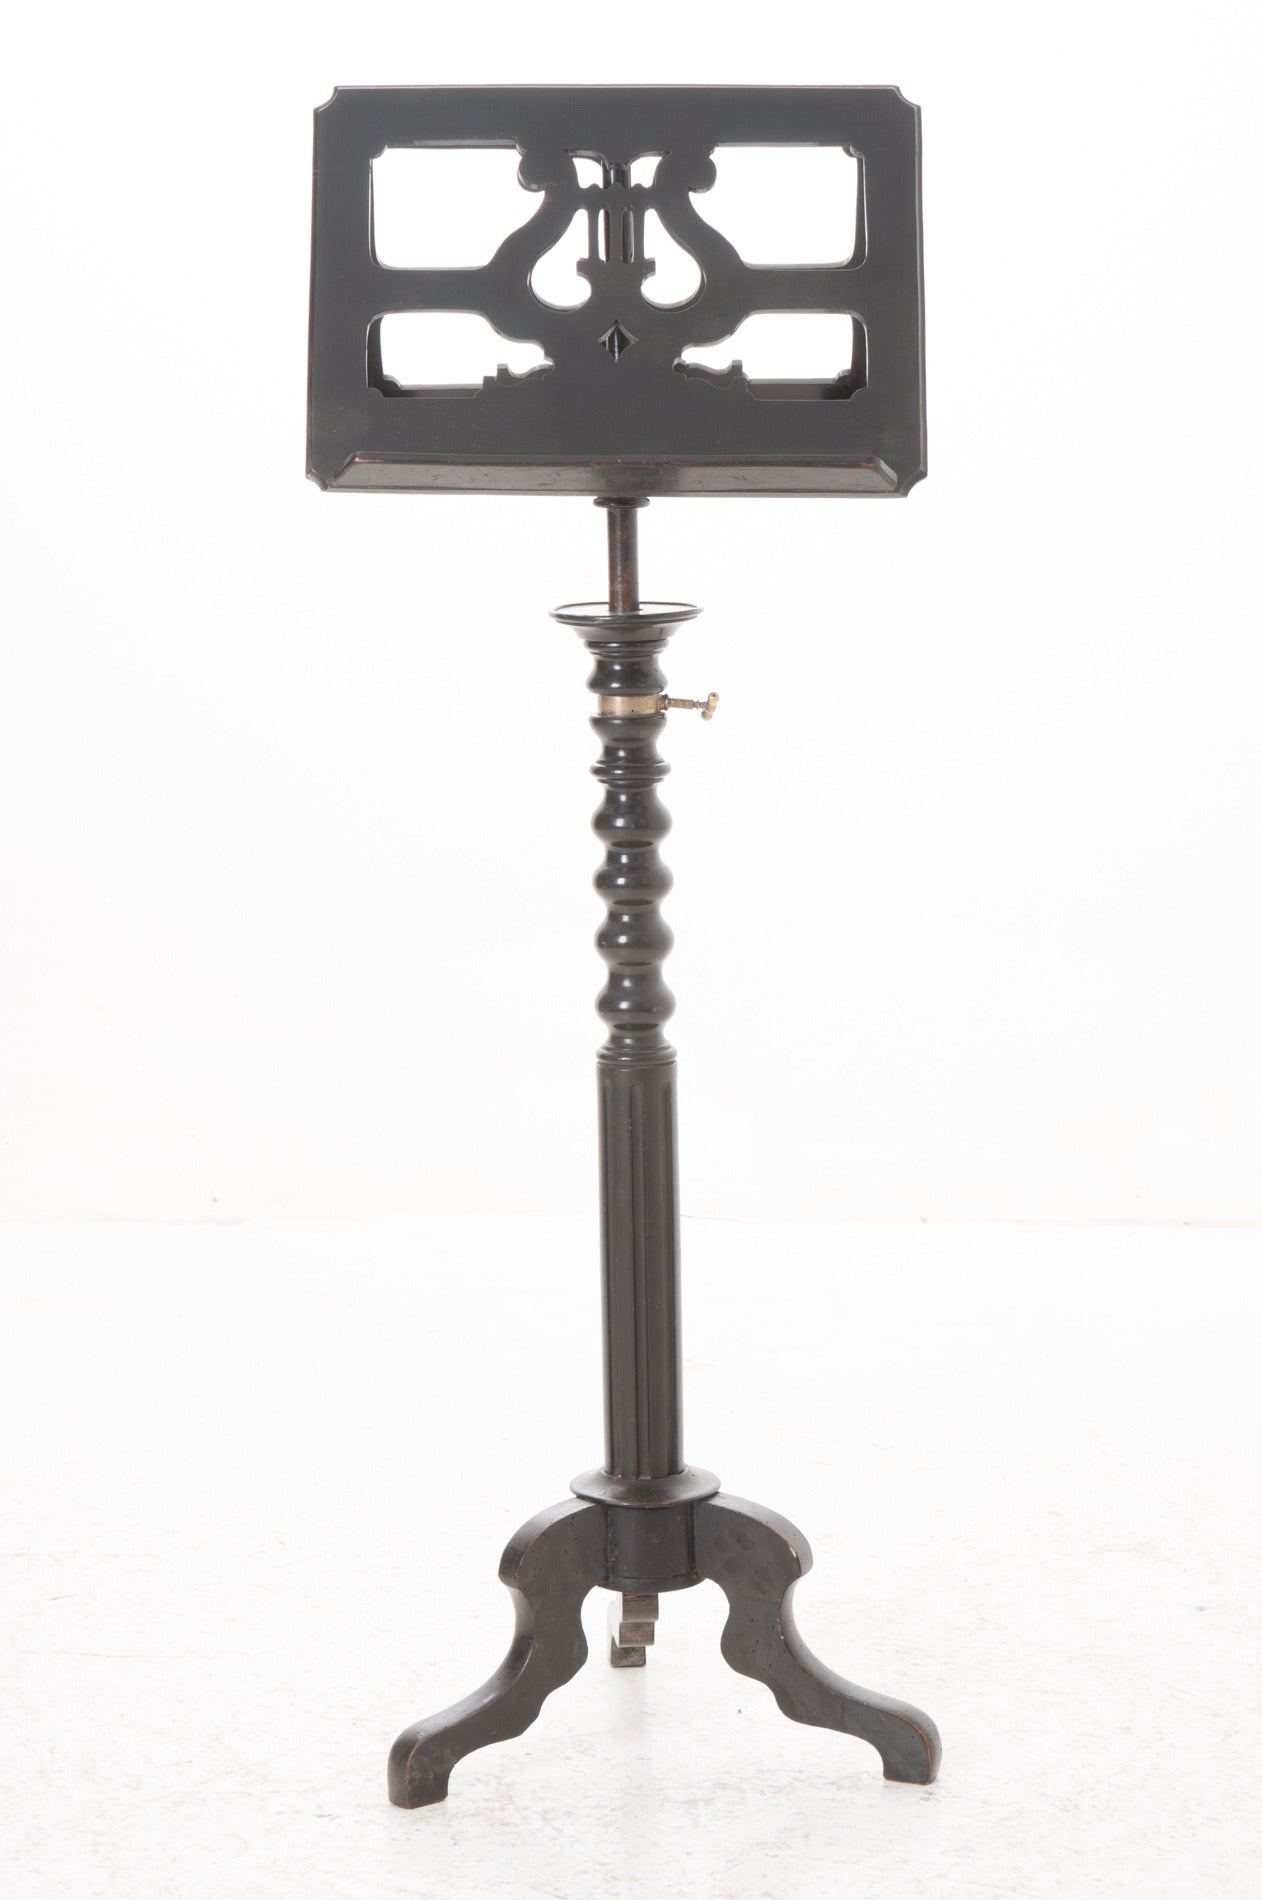 A darling duet sheet music stand having lyre decorations with sturdy resting surfaces on each side for sheet music or books. The stand can be adjusted for height using the original brass hardware over a turned wood and fluted column ending in a